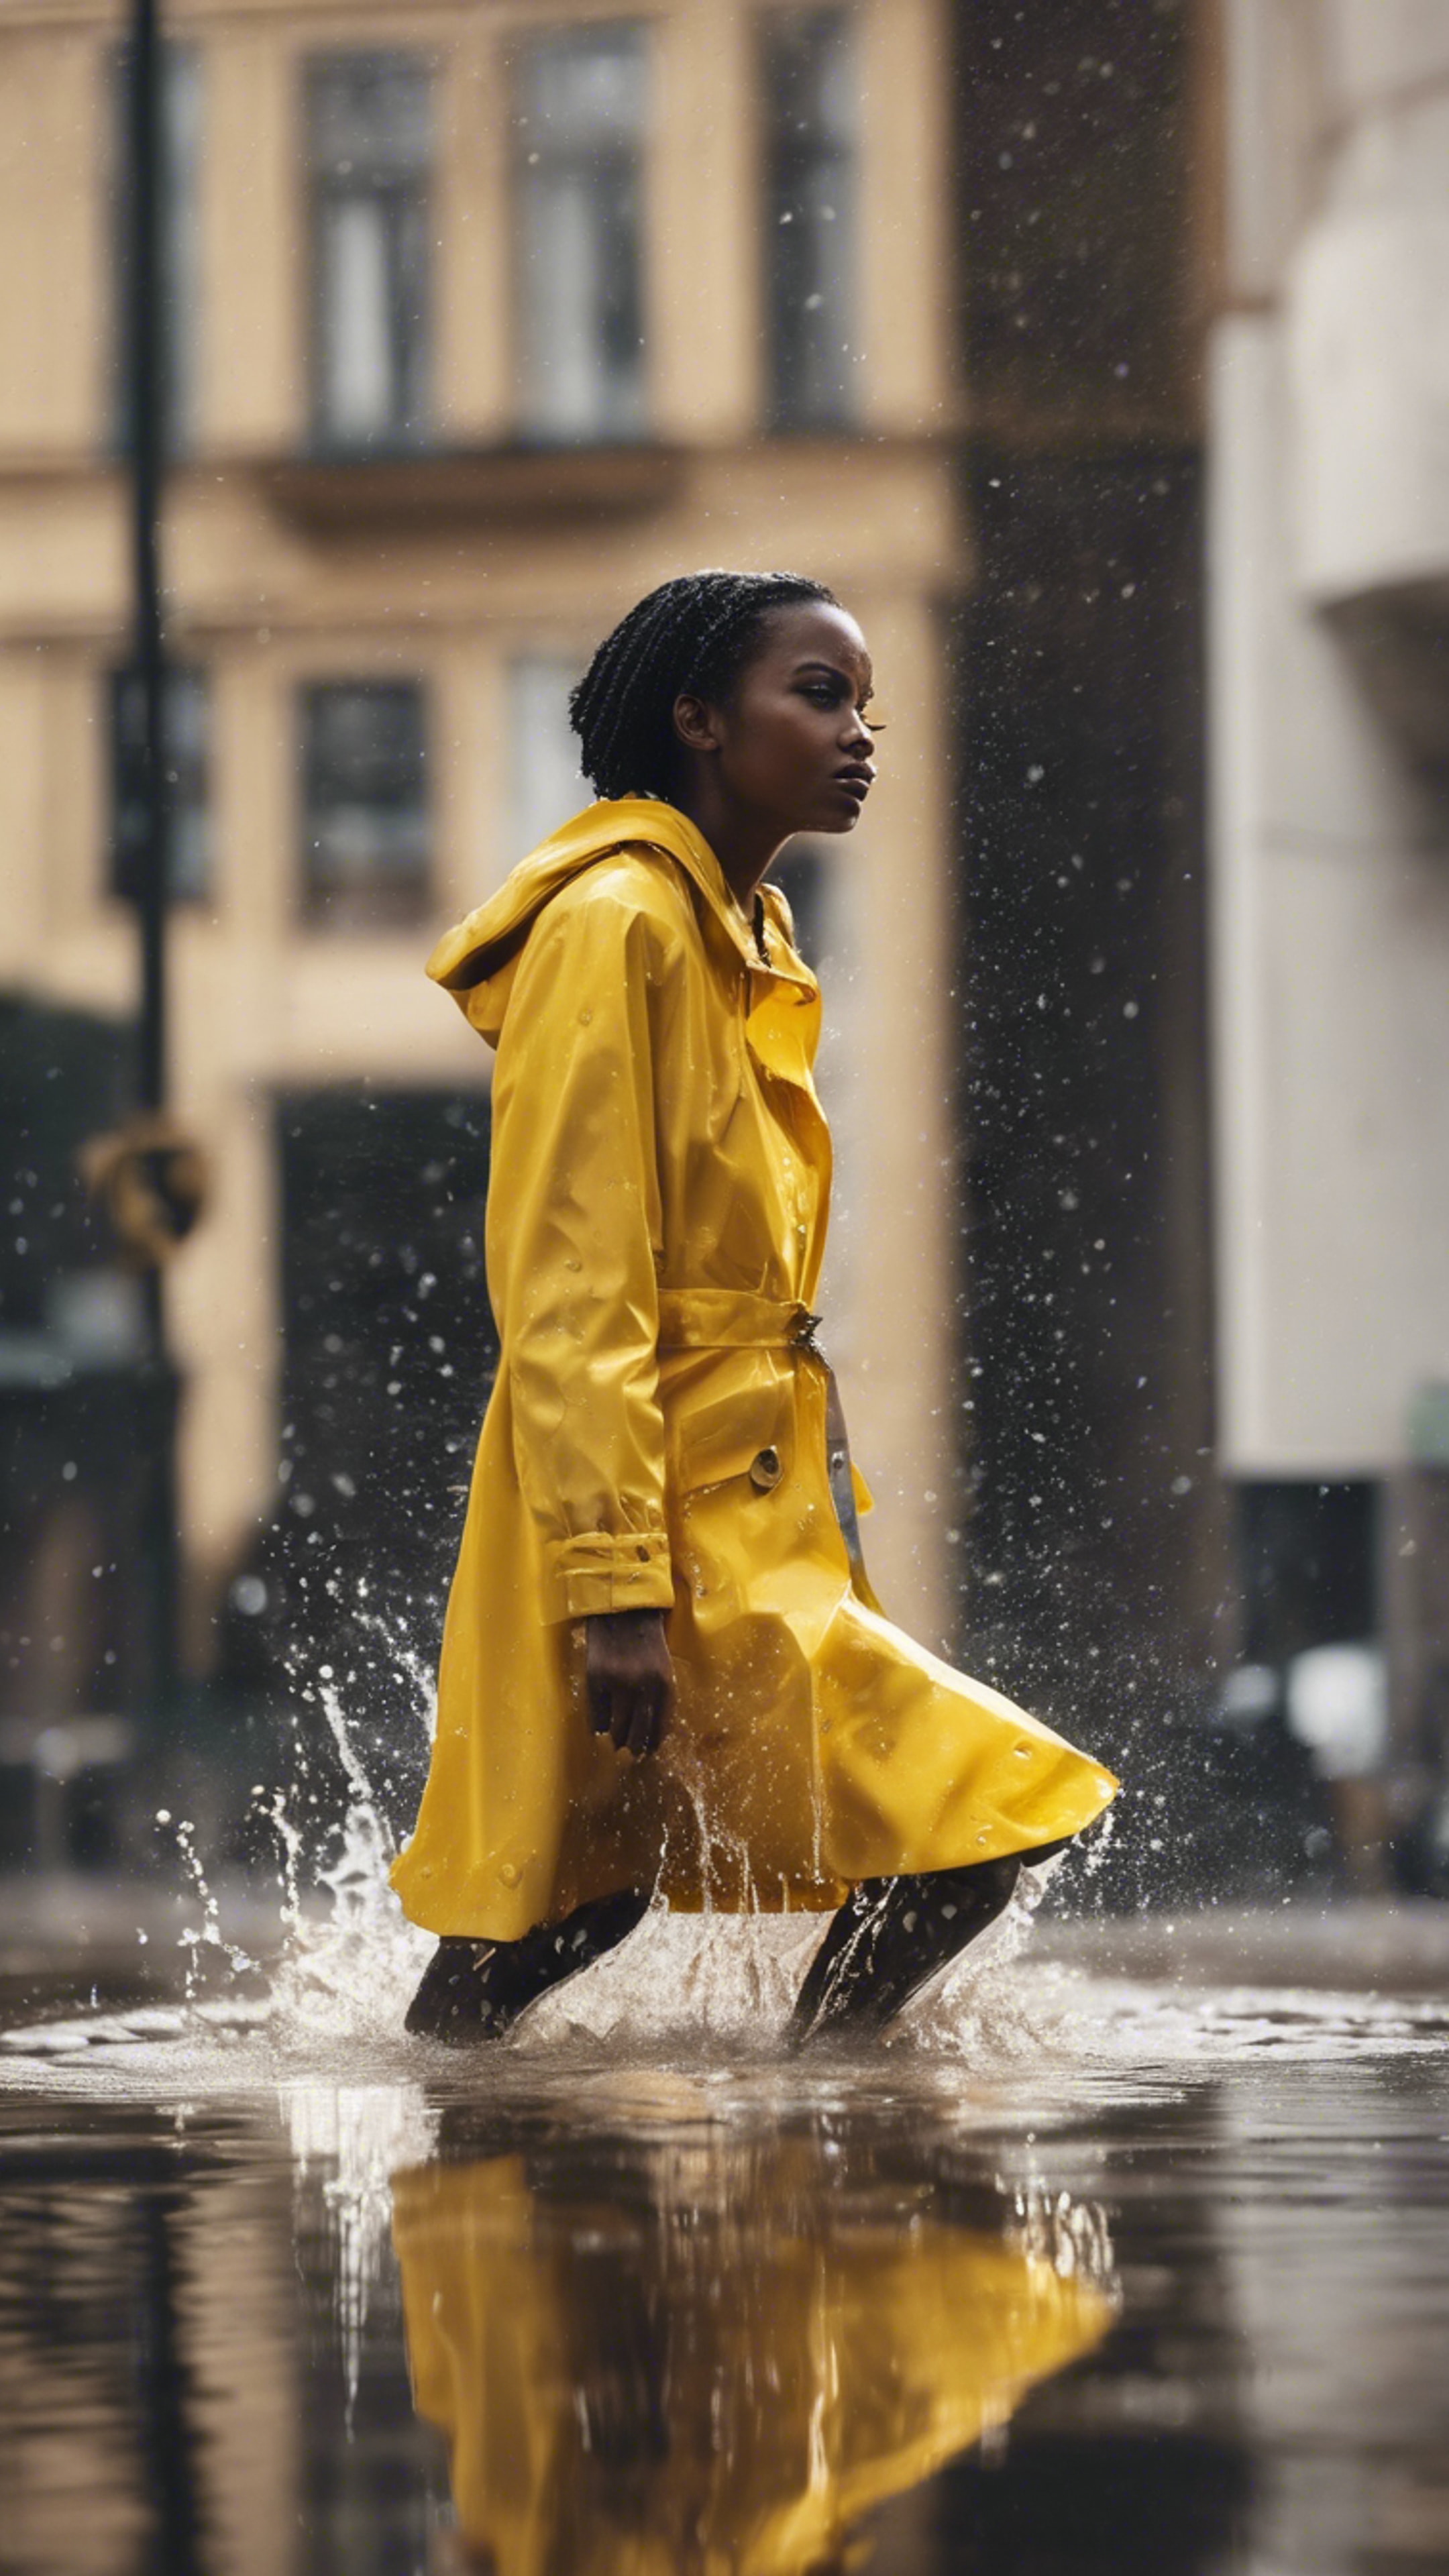 A black girl in a bright yellow raincoat splashing water in puddles after a heavy rain. Tapeta[a80398e4c066404db875]